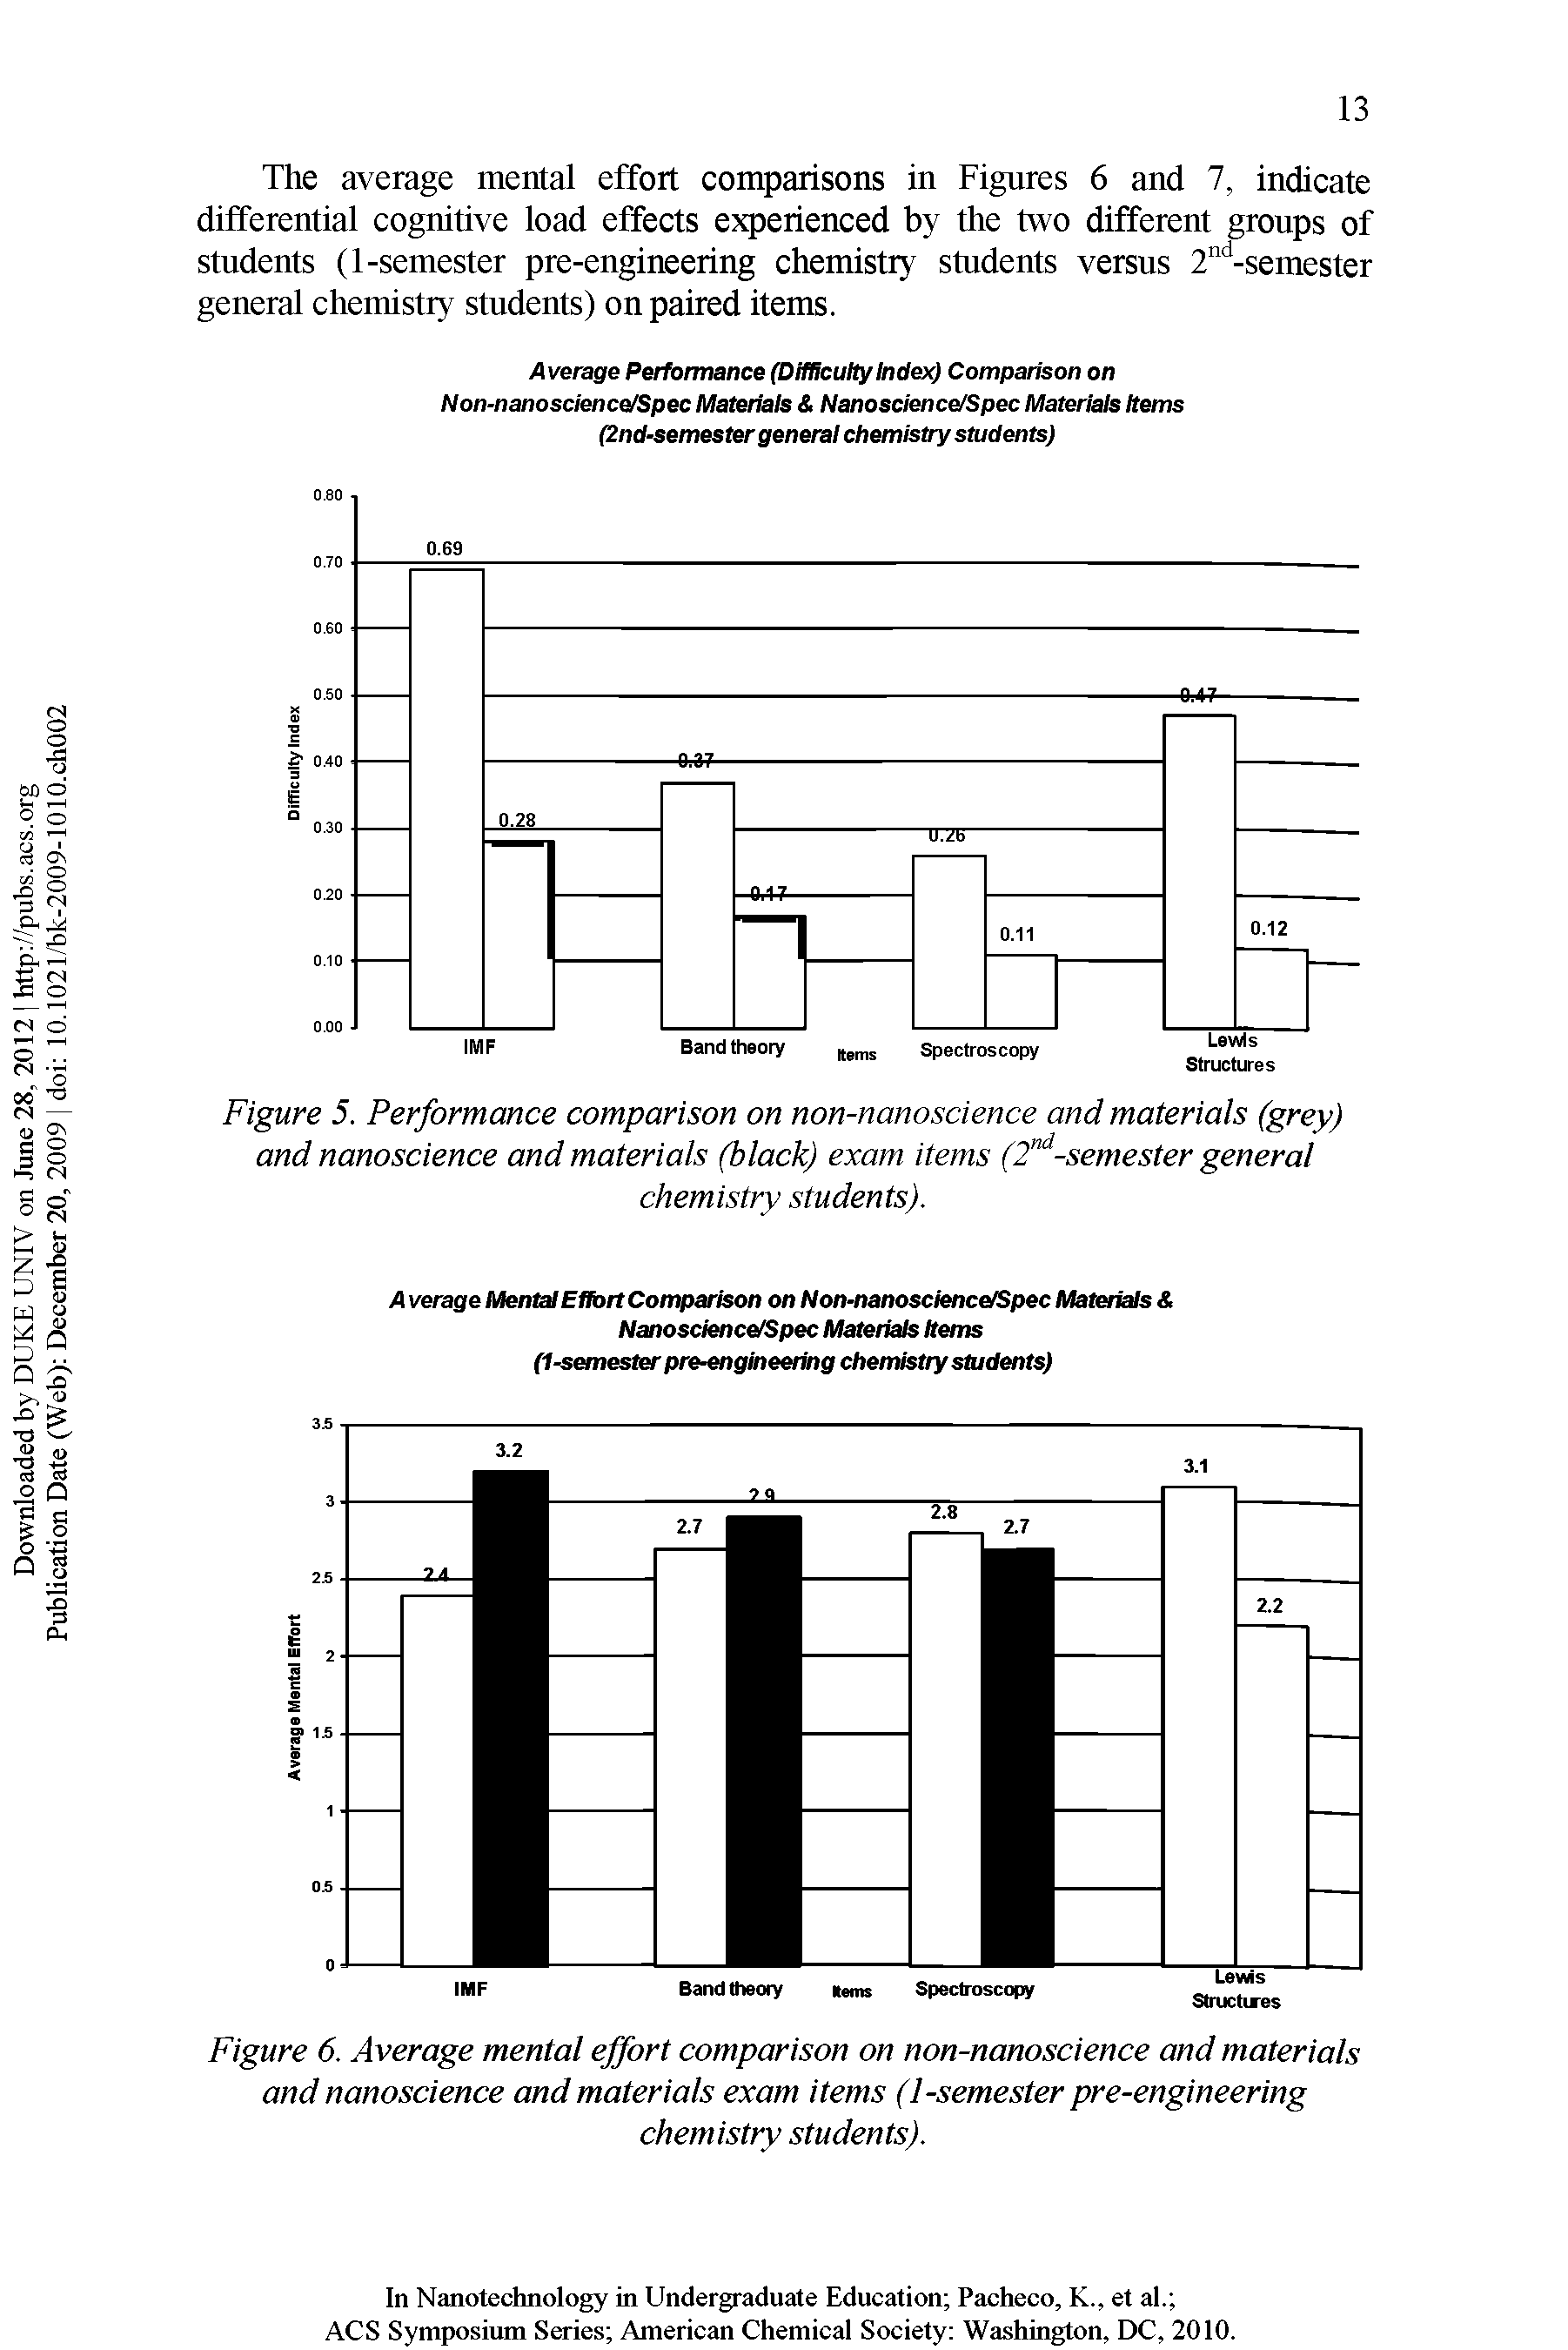 Figure 6. Average mental effort comparison on non-nanoscience and materials and nanoscience and materials exam items (1-semester pre-engineering chemistry students).